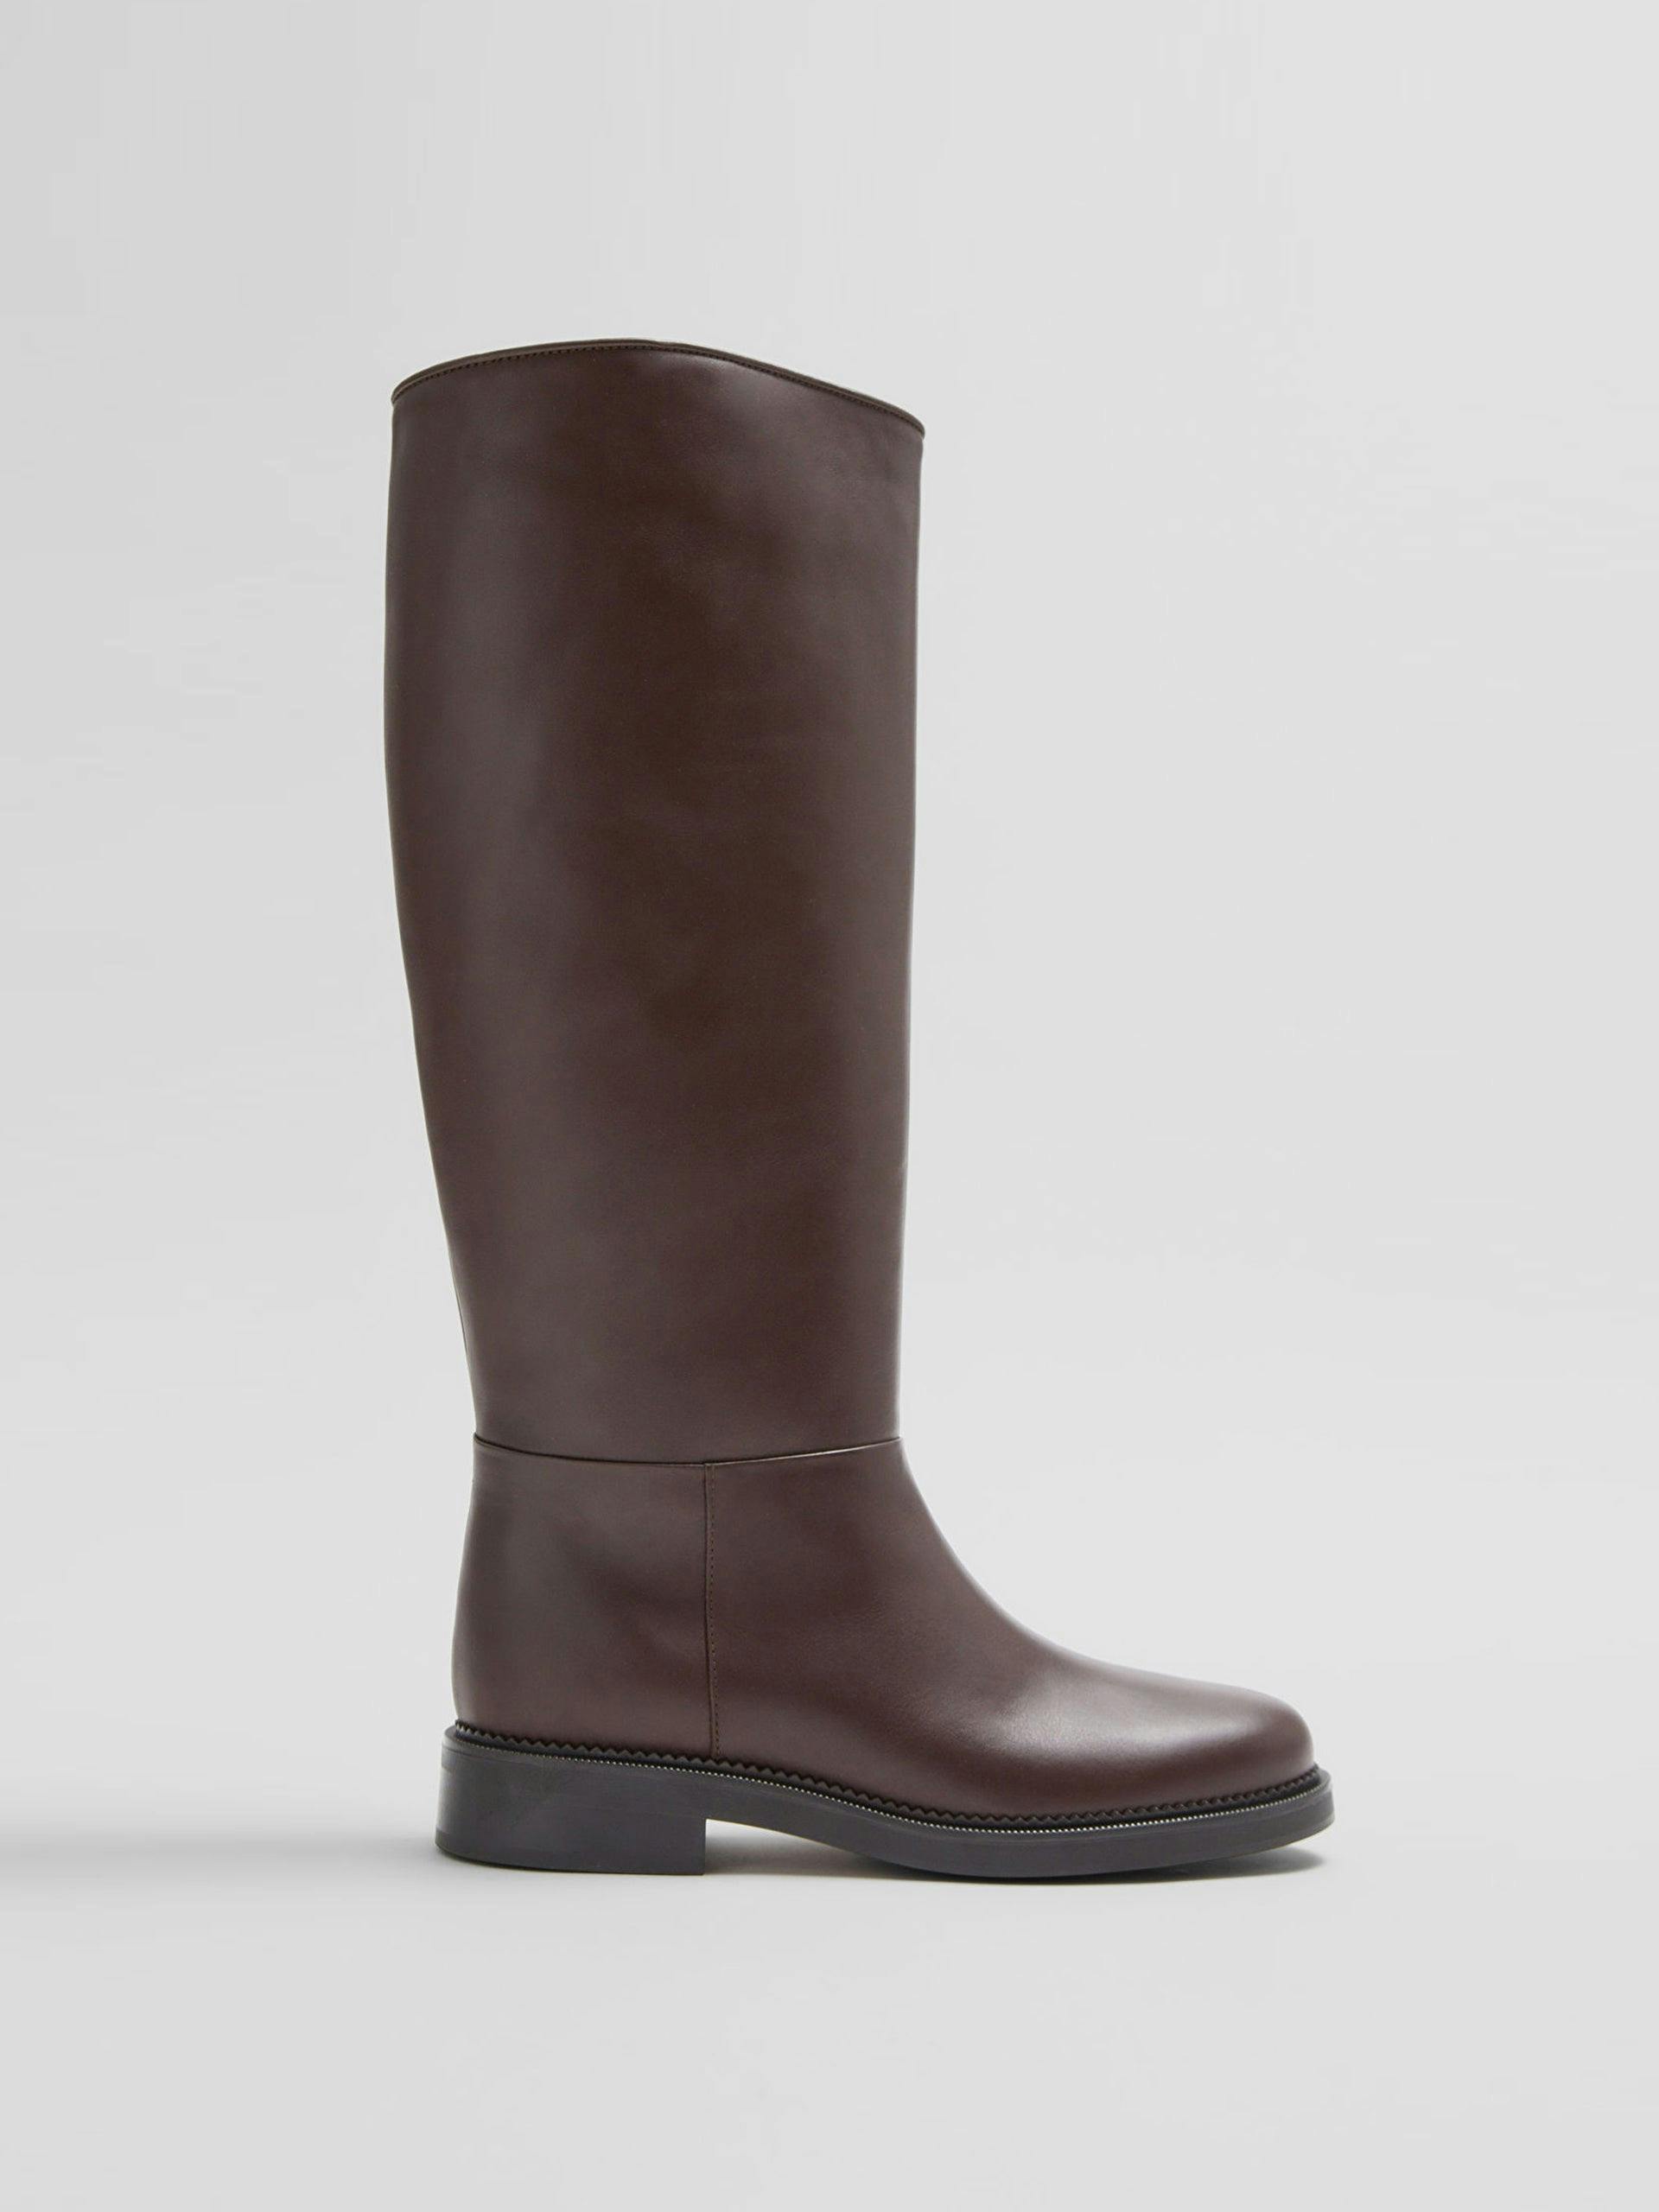 Brown leather riding boots